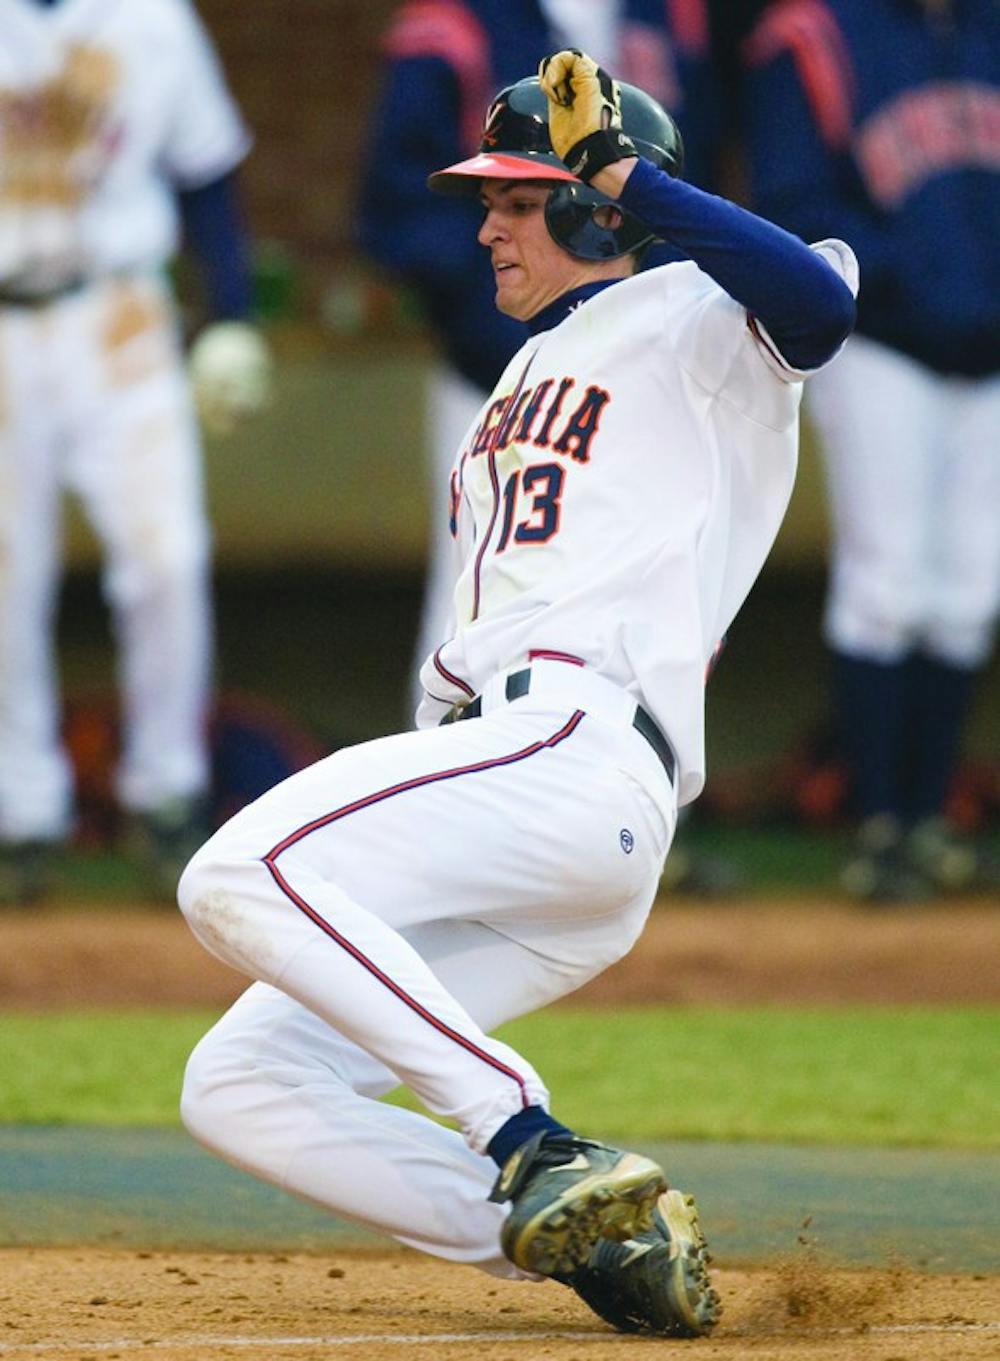 Virginia Cavaliers OF Jarrett Parker (13) slides in to home to score a run.  The #16 ranked Virginia Cavaliers baseball team defeated the Siena Saints 17-2 at the University of Virginia's Davenport Field in Charlottesville, VA on February 29, 2008.